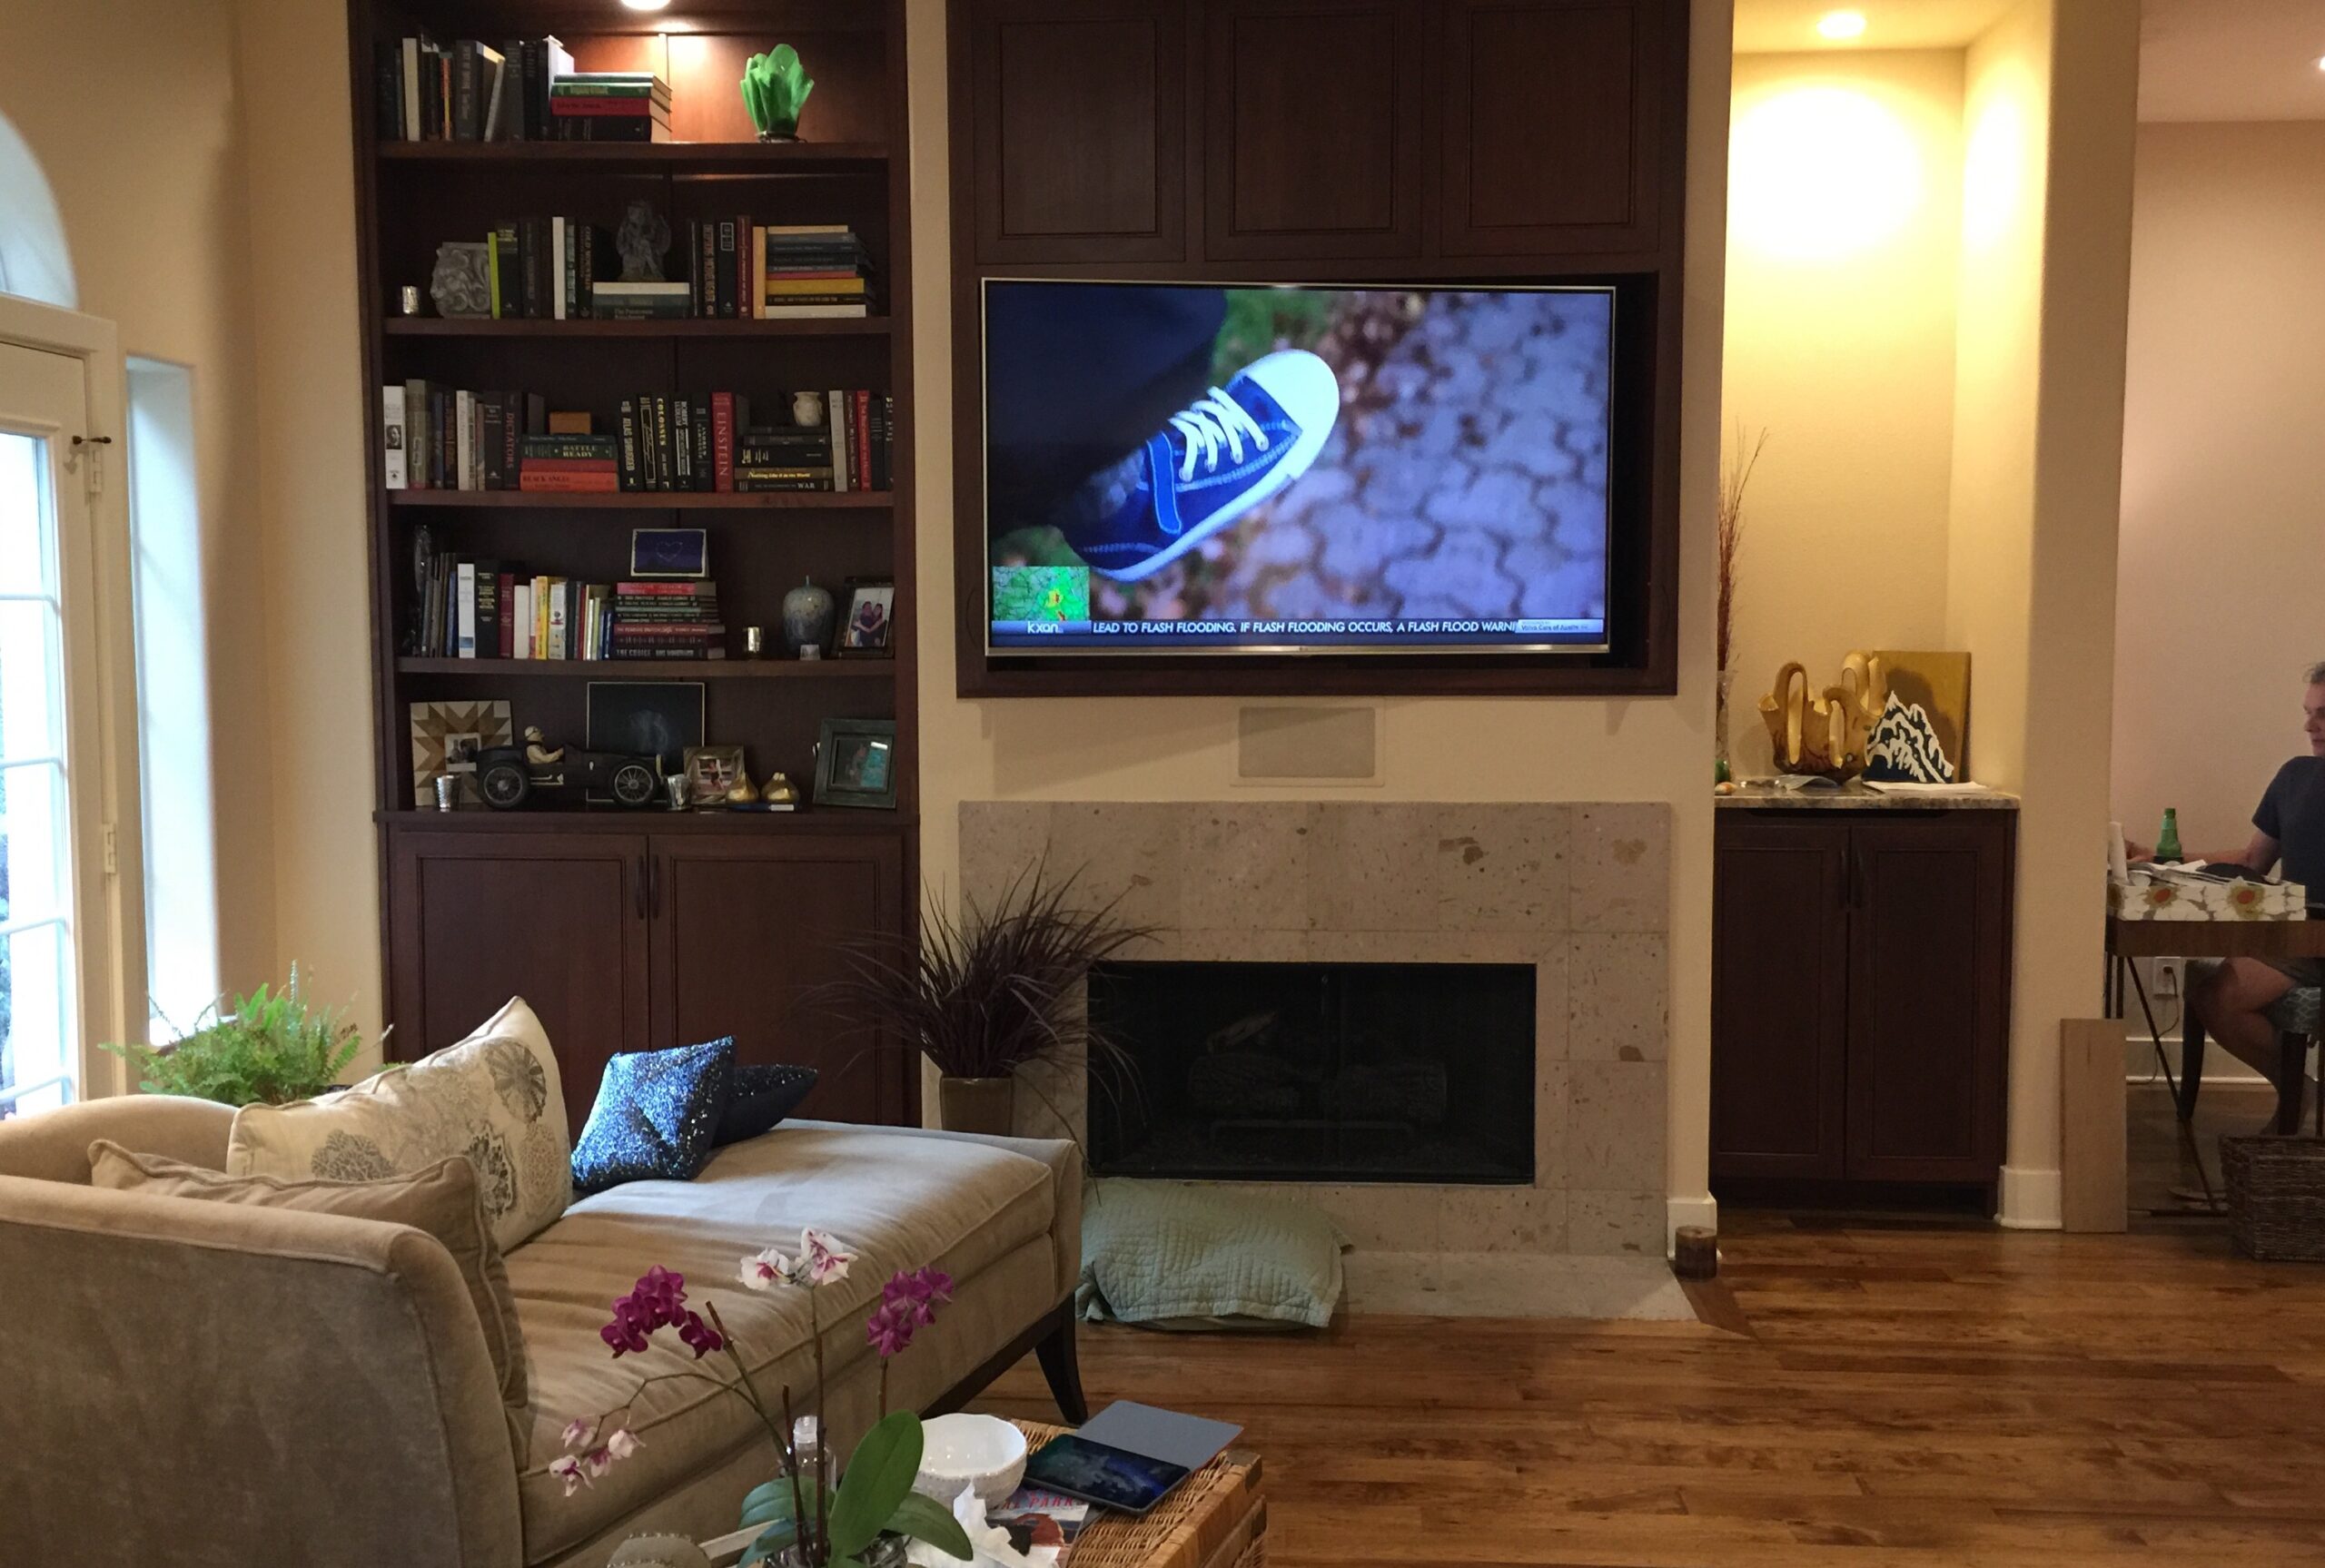 Media room with hidden speakers and TV installed in wall above fireplace